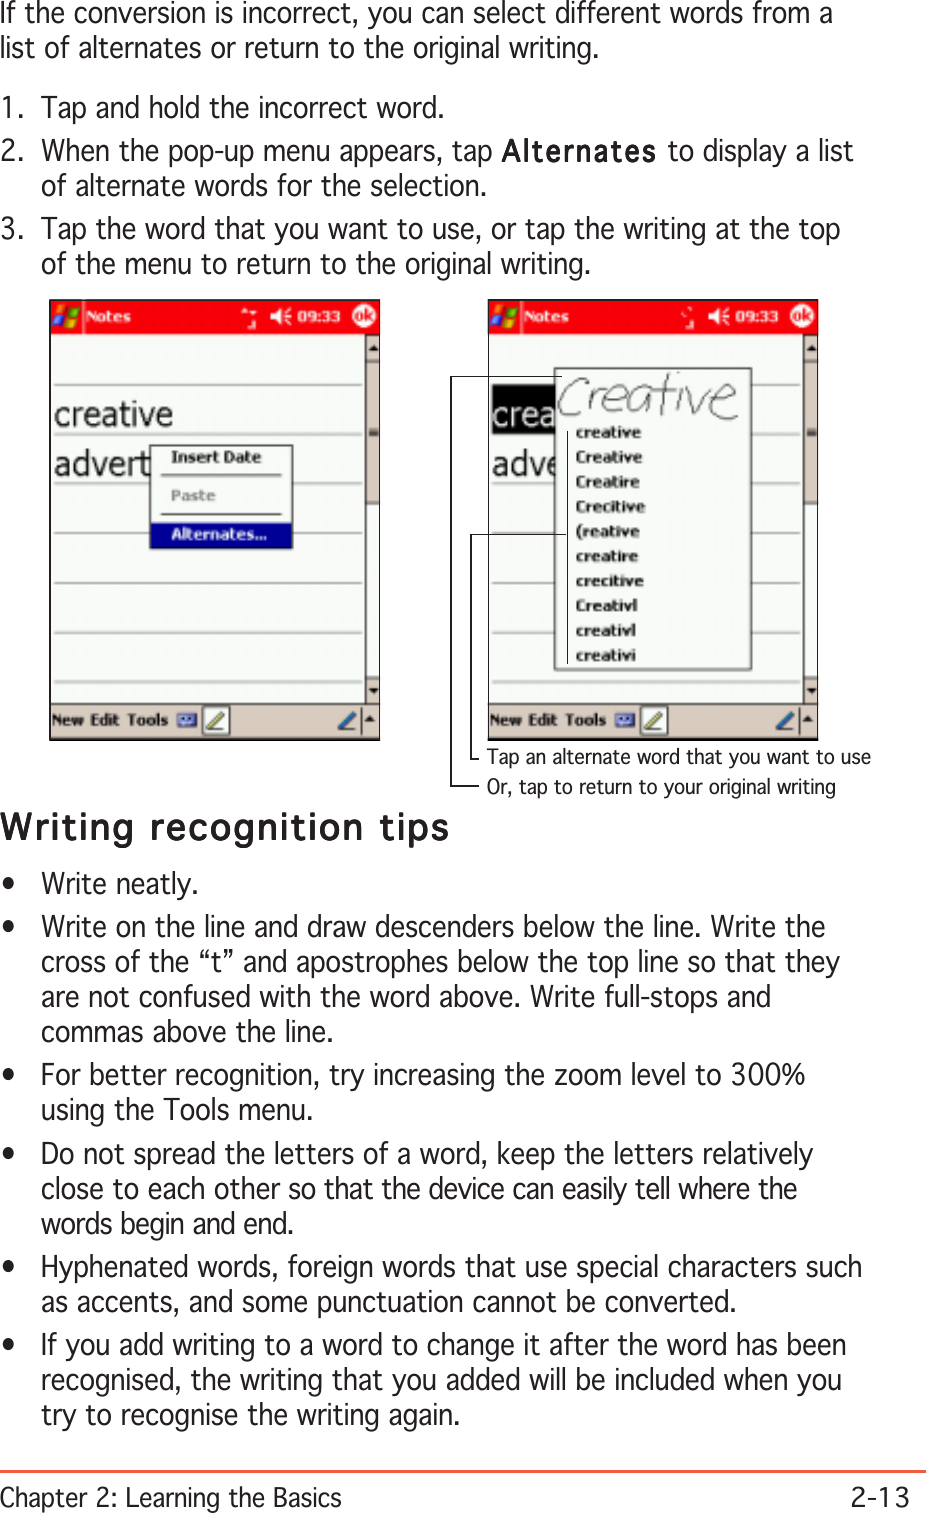 Chapter 2: Learning the Basics2-13If the conversion is incorrect, you can select different words from alist of alternates or return to the original writing.1. Tap and hold the incorrect word.2. When the pop-up menu appears, tap AlternatesAlternatesAlternatesAlternatesAlternates to display a listof alternate words for the selection.3. Tap the word that you want to use, or tap the writing at the topof the menu to return to the original writing.Writing recognition tipsWriting recognition tipsWriting recognition tipsWriting recognition tipsWriting recognition tips• Write neatly.• Write on the line and draw descenders below the line. Write thecross of the “t” and apostrophes below the top line so that theyare not confused with the word above. Write full-stops andcommas above the line.• For better recognition, try increasing the zoom level to 300%using the Tools menu.• Do not spread the letters of a word, keep the letters relativelyclose to each other so that the device can easily tell where thewords begin and end.• Hyphenated words, foreign words that use special characters suchas accents, and some punctuation cannot be converted.• If you add writing to a word to change it after the word has beenrecognised, the writing that you added will be included when youtry to recognise the writing again.Or, tap to return to your original writingTap an alternate word that you want to use